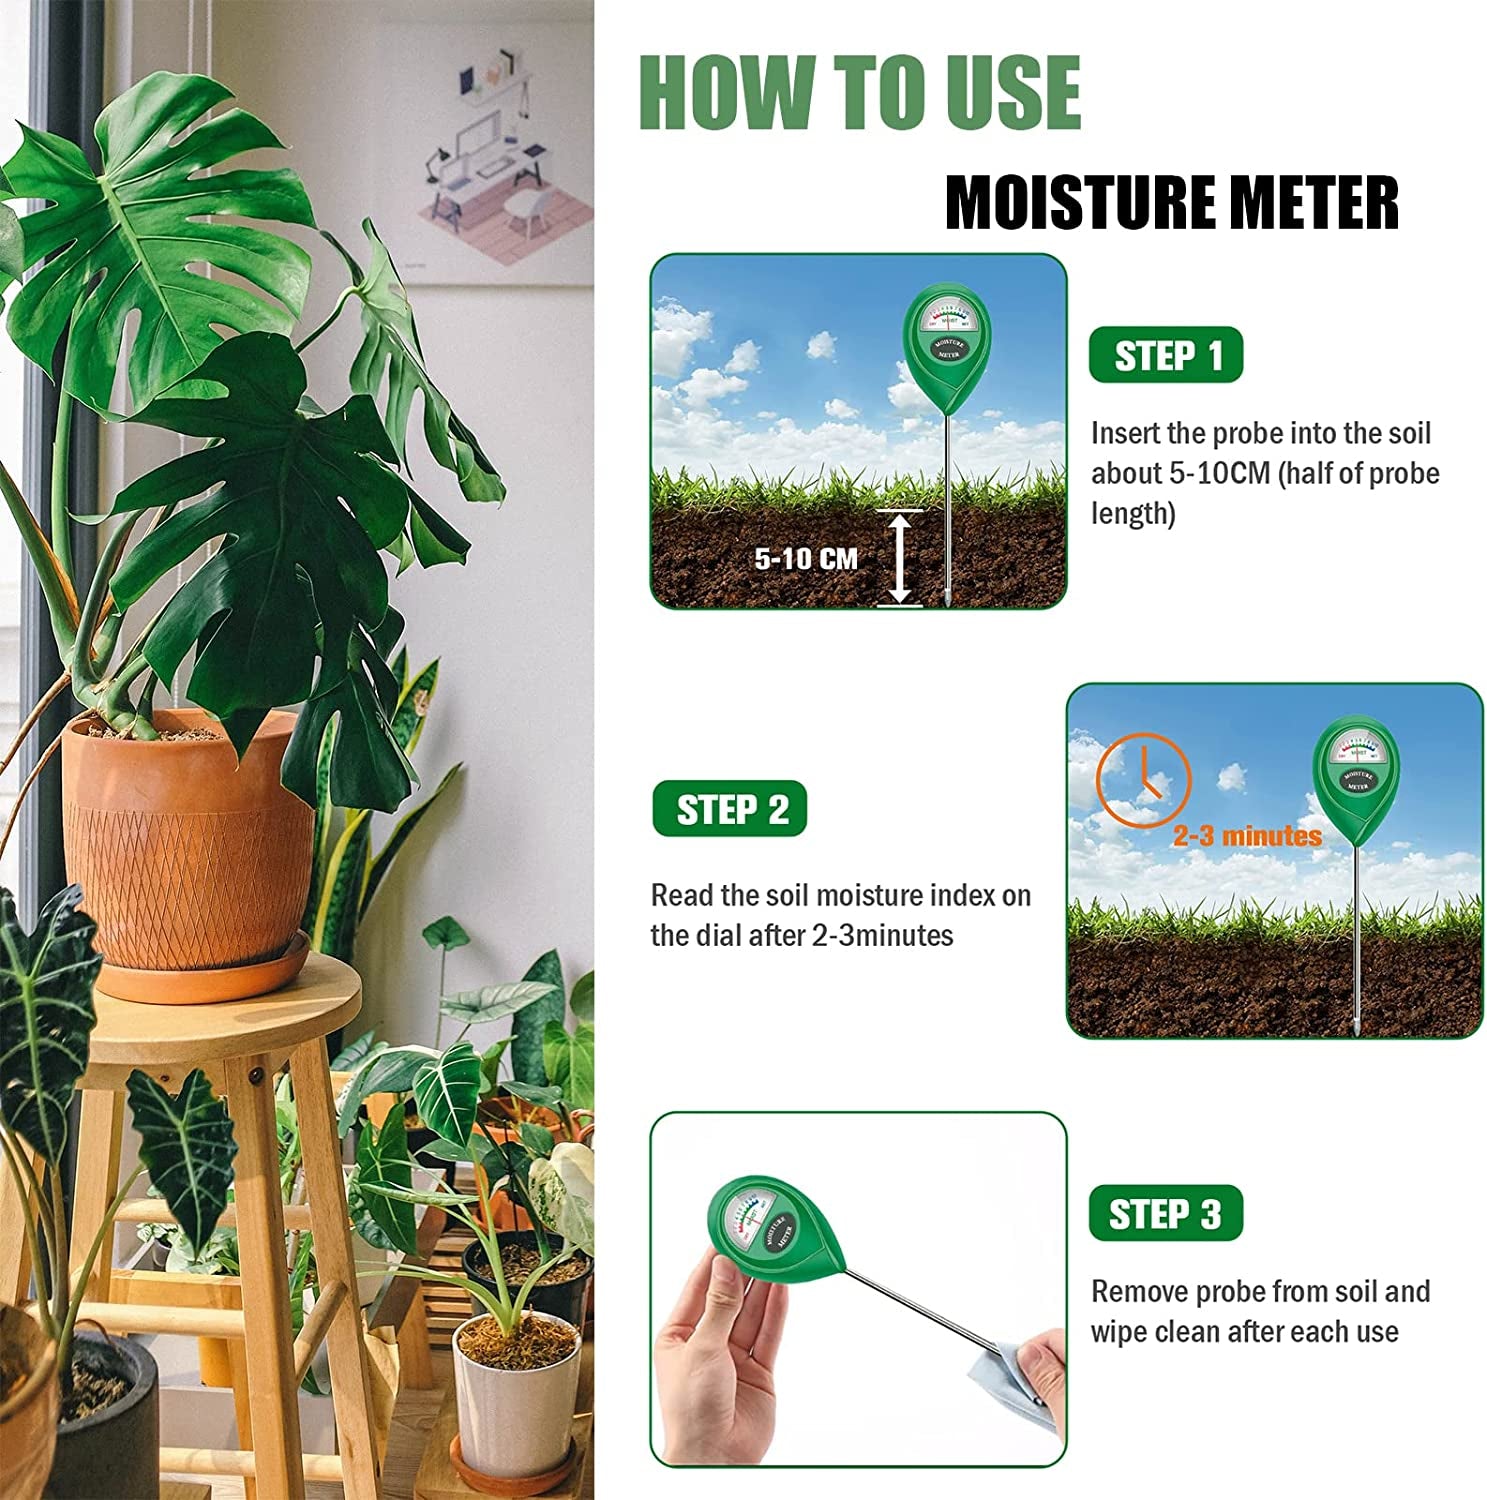 croch, Soil Moisture Meter Plant Soil Tester for Plant Care, Gardening, Farming, Indoor & Outdoor Use - No Battery Needed